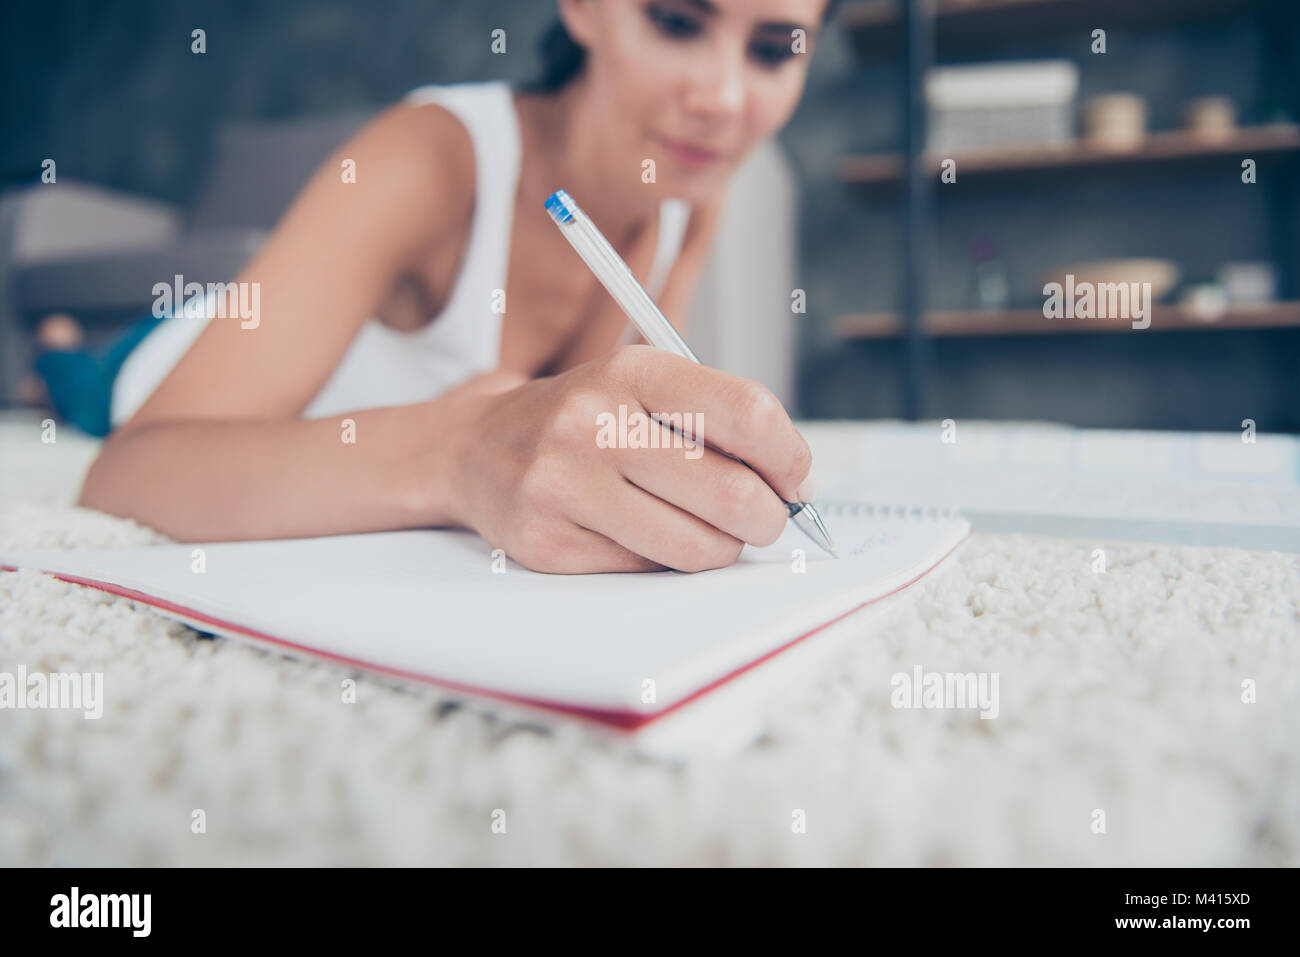 Close up portrait of woman hand with pencil writing in copybook, blurred background of girl laying on stomach on carpet Stock Photo